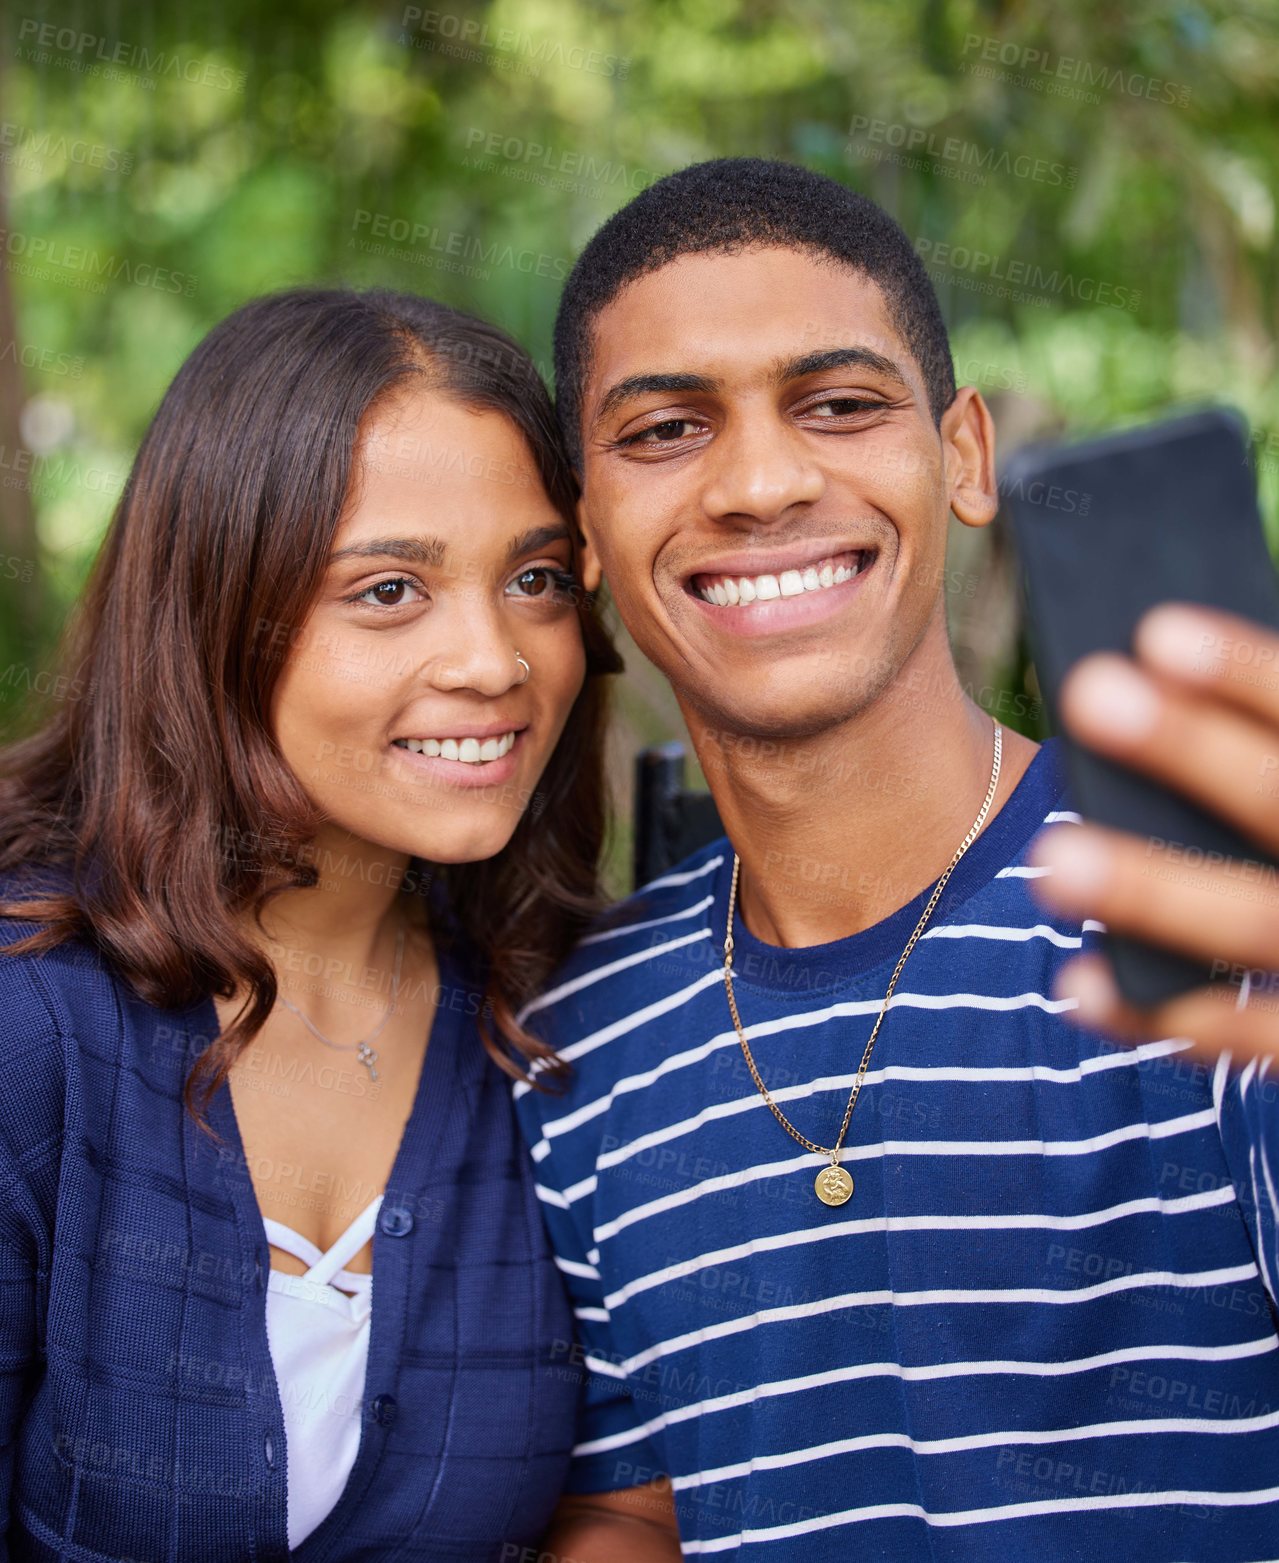 Buy stock photo Shot of a young couple taking a selfie outside